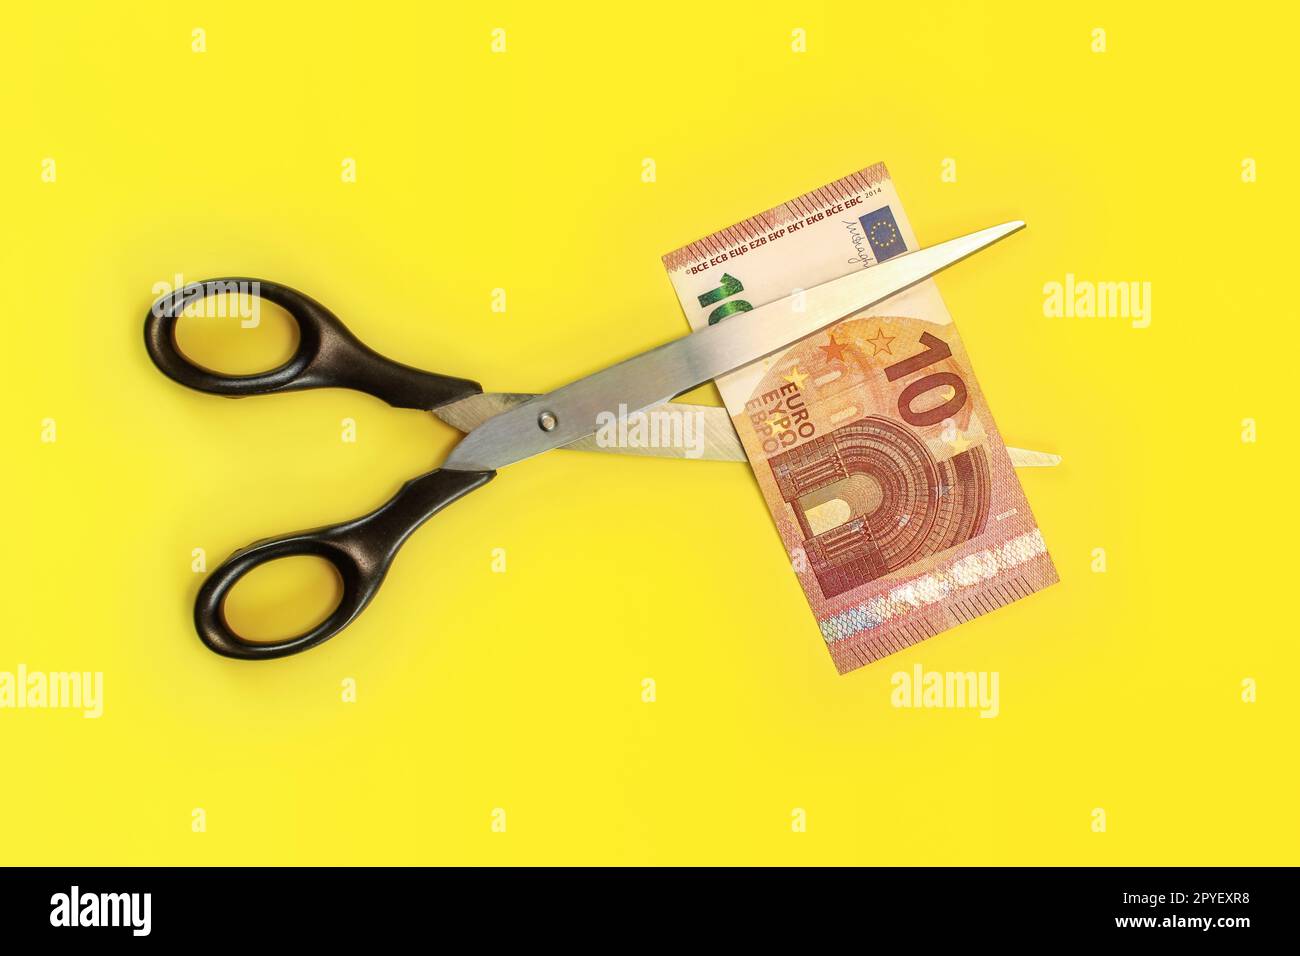 Tabletop view - large scissors cutting ten eur banknote over yellow board. Cut fees concept. Stock Photo